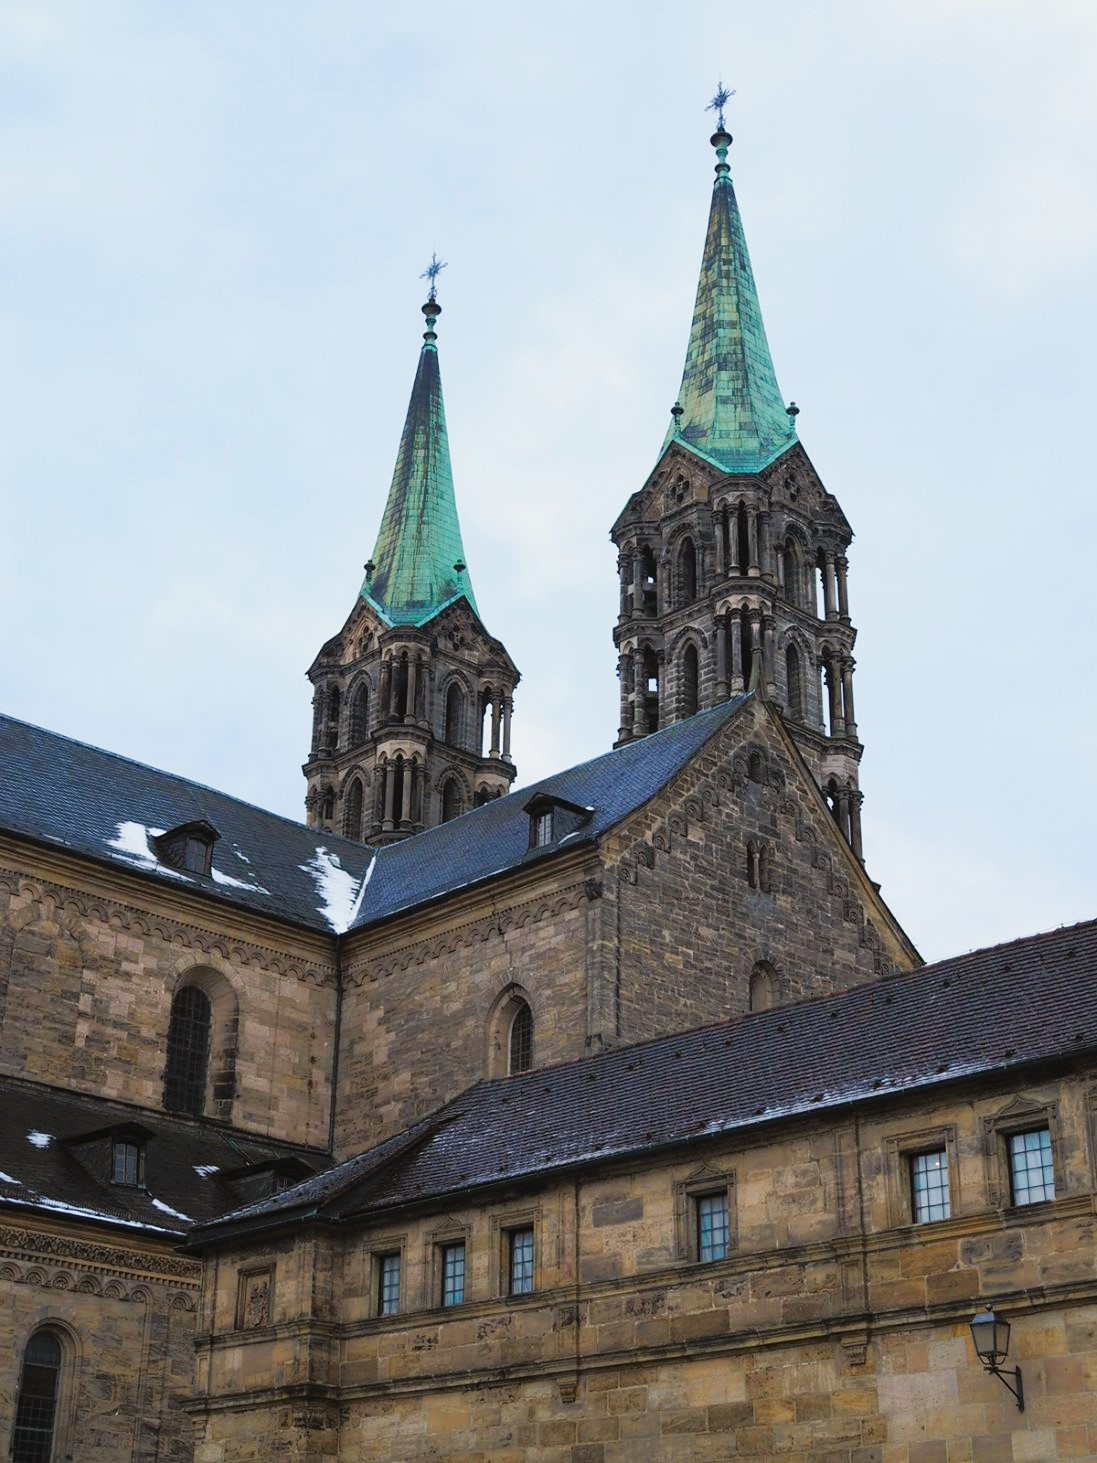 Two copper plated cathedral spires rise high above the sandstone walls of the Bamberg Cathedral and the Old Courtyard